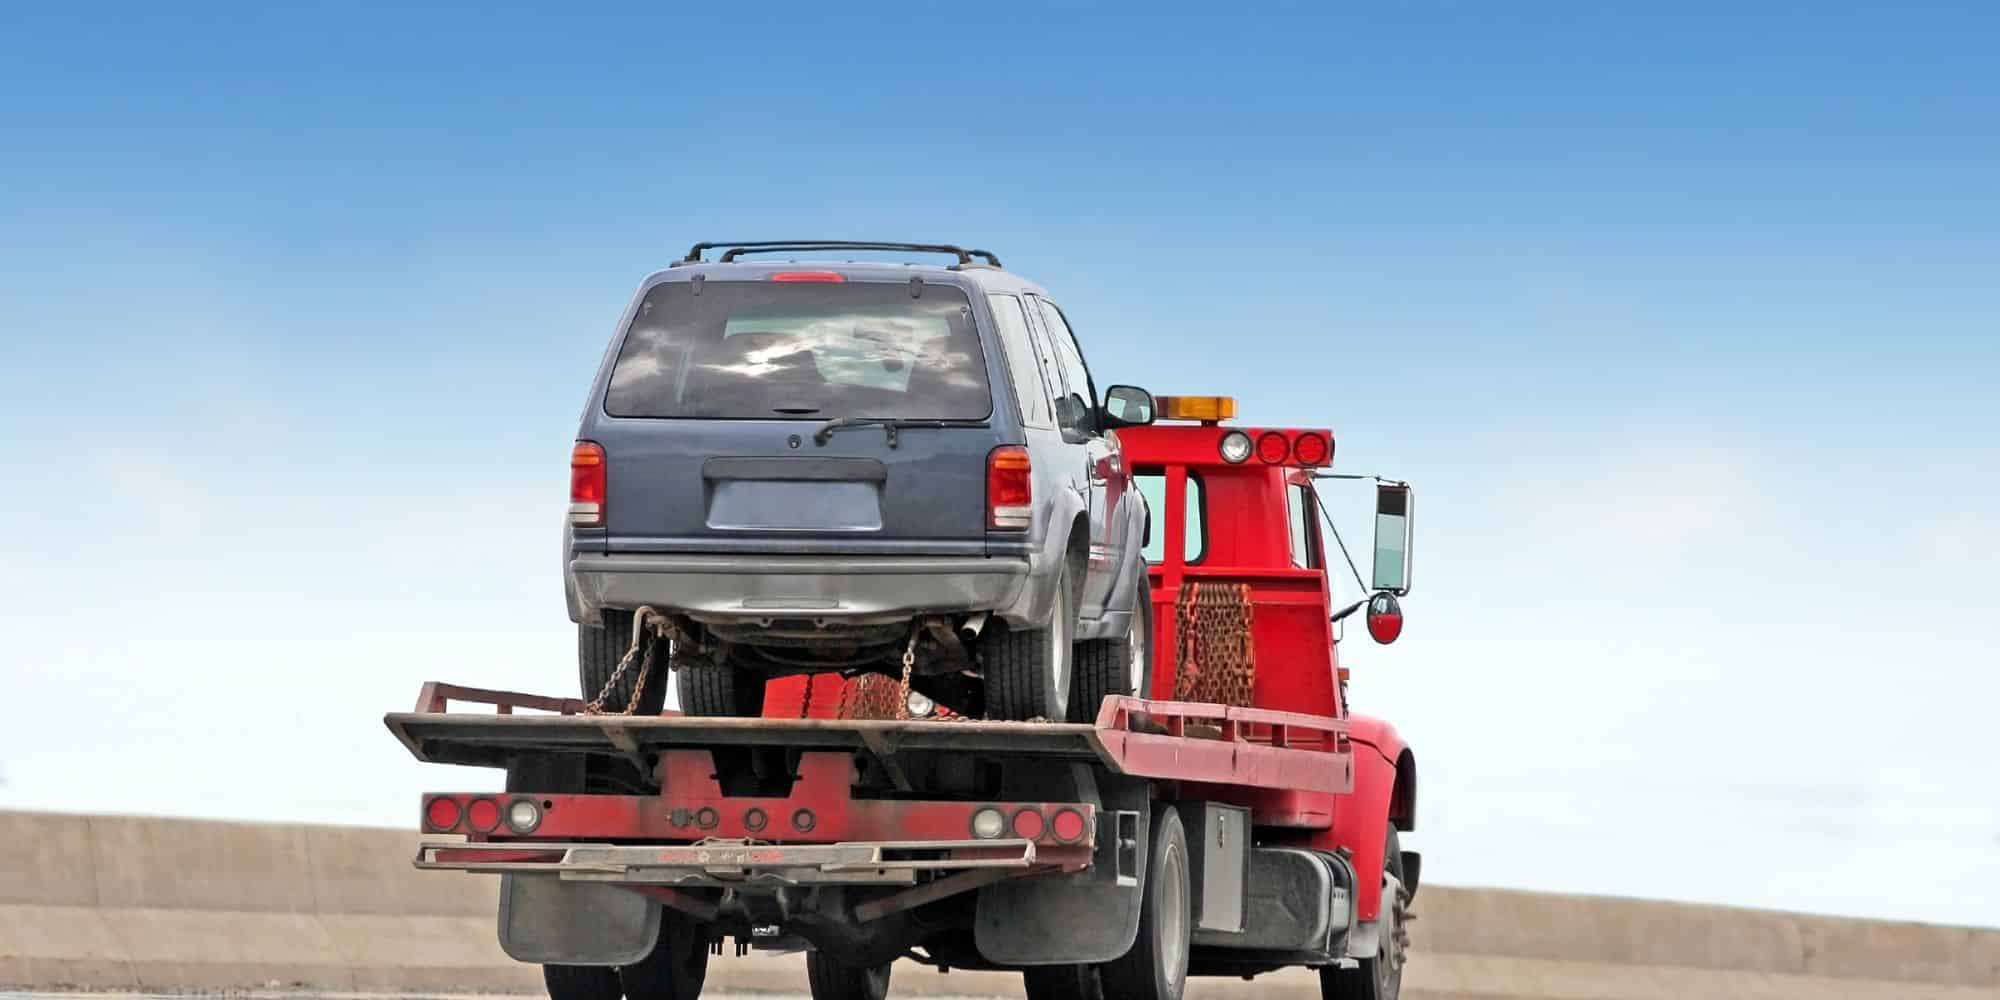 Towing Service: An In-Depth Look at the Technologies and Techniques Behind Modern Towing